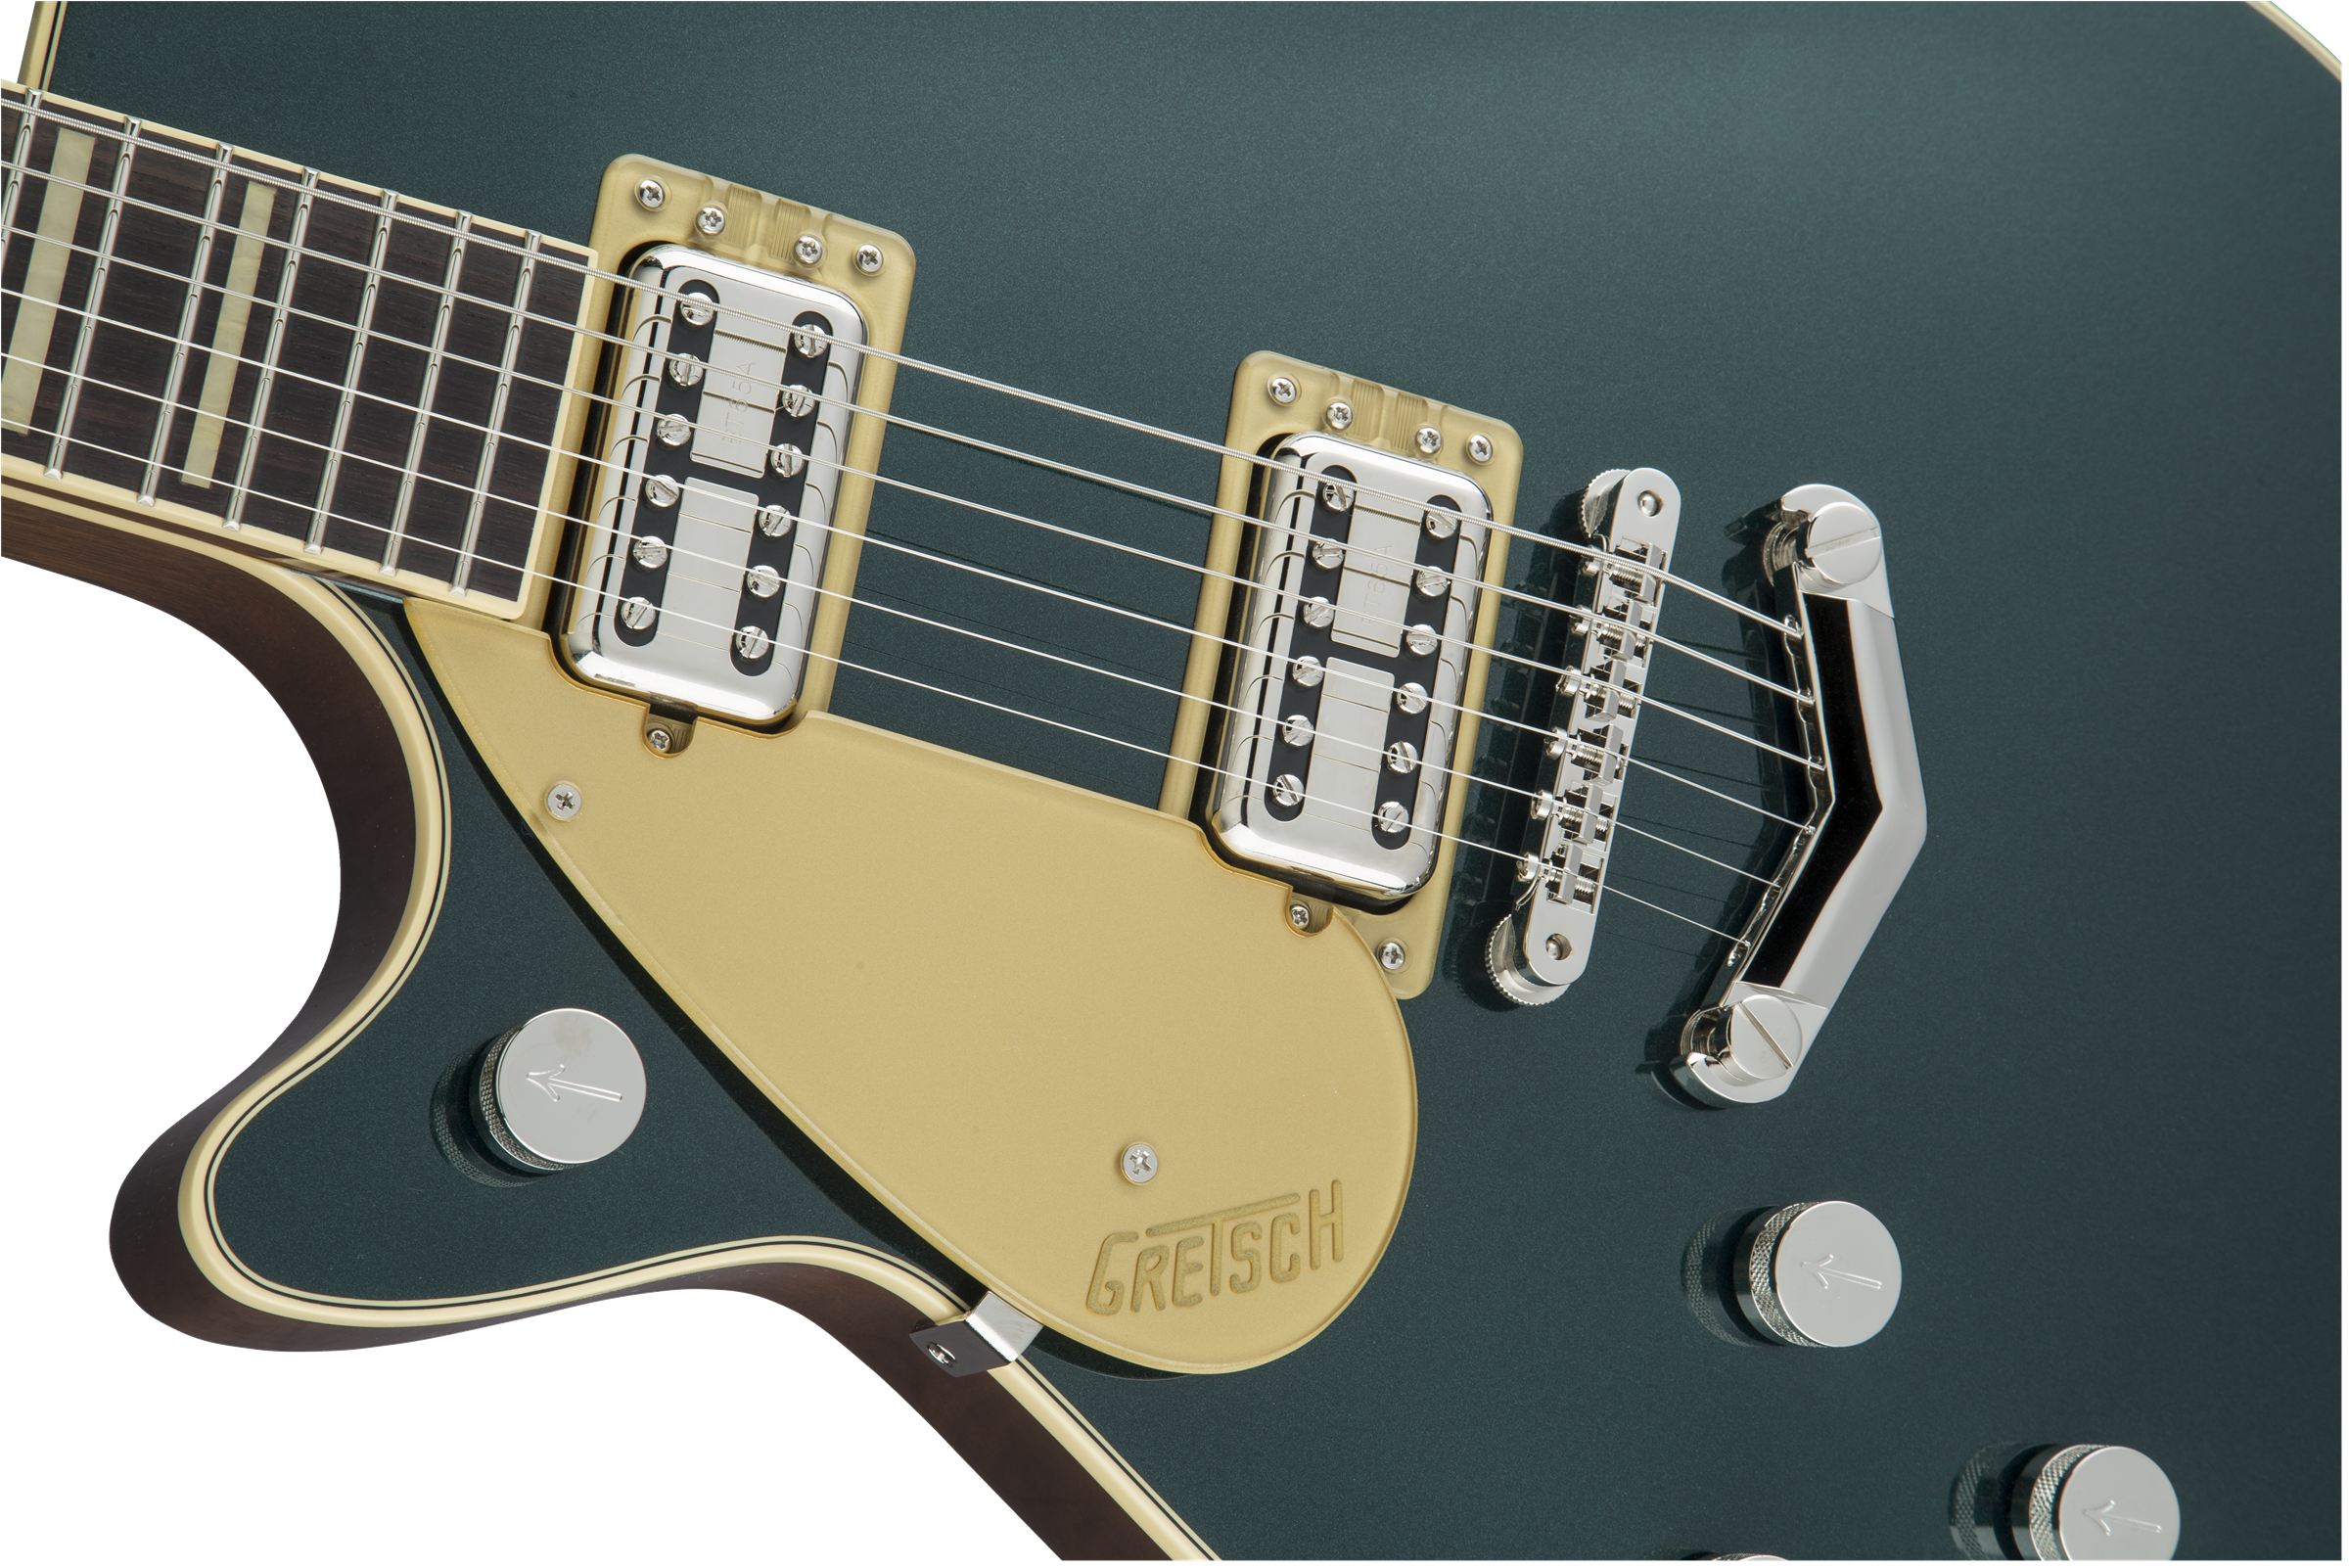 Gretsch G6228 Players Edition Jet BT Left-Handed Electric Guitar - Cadillac Green